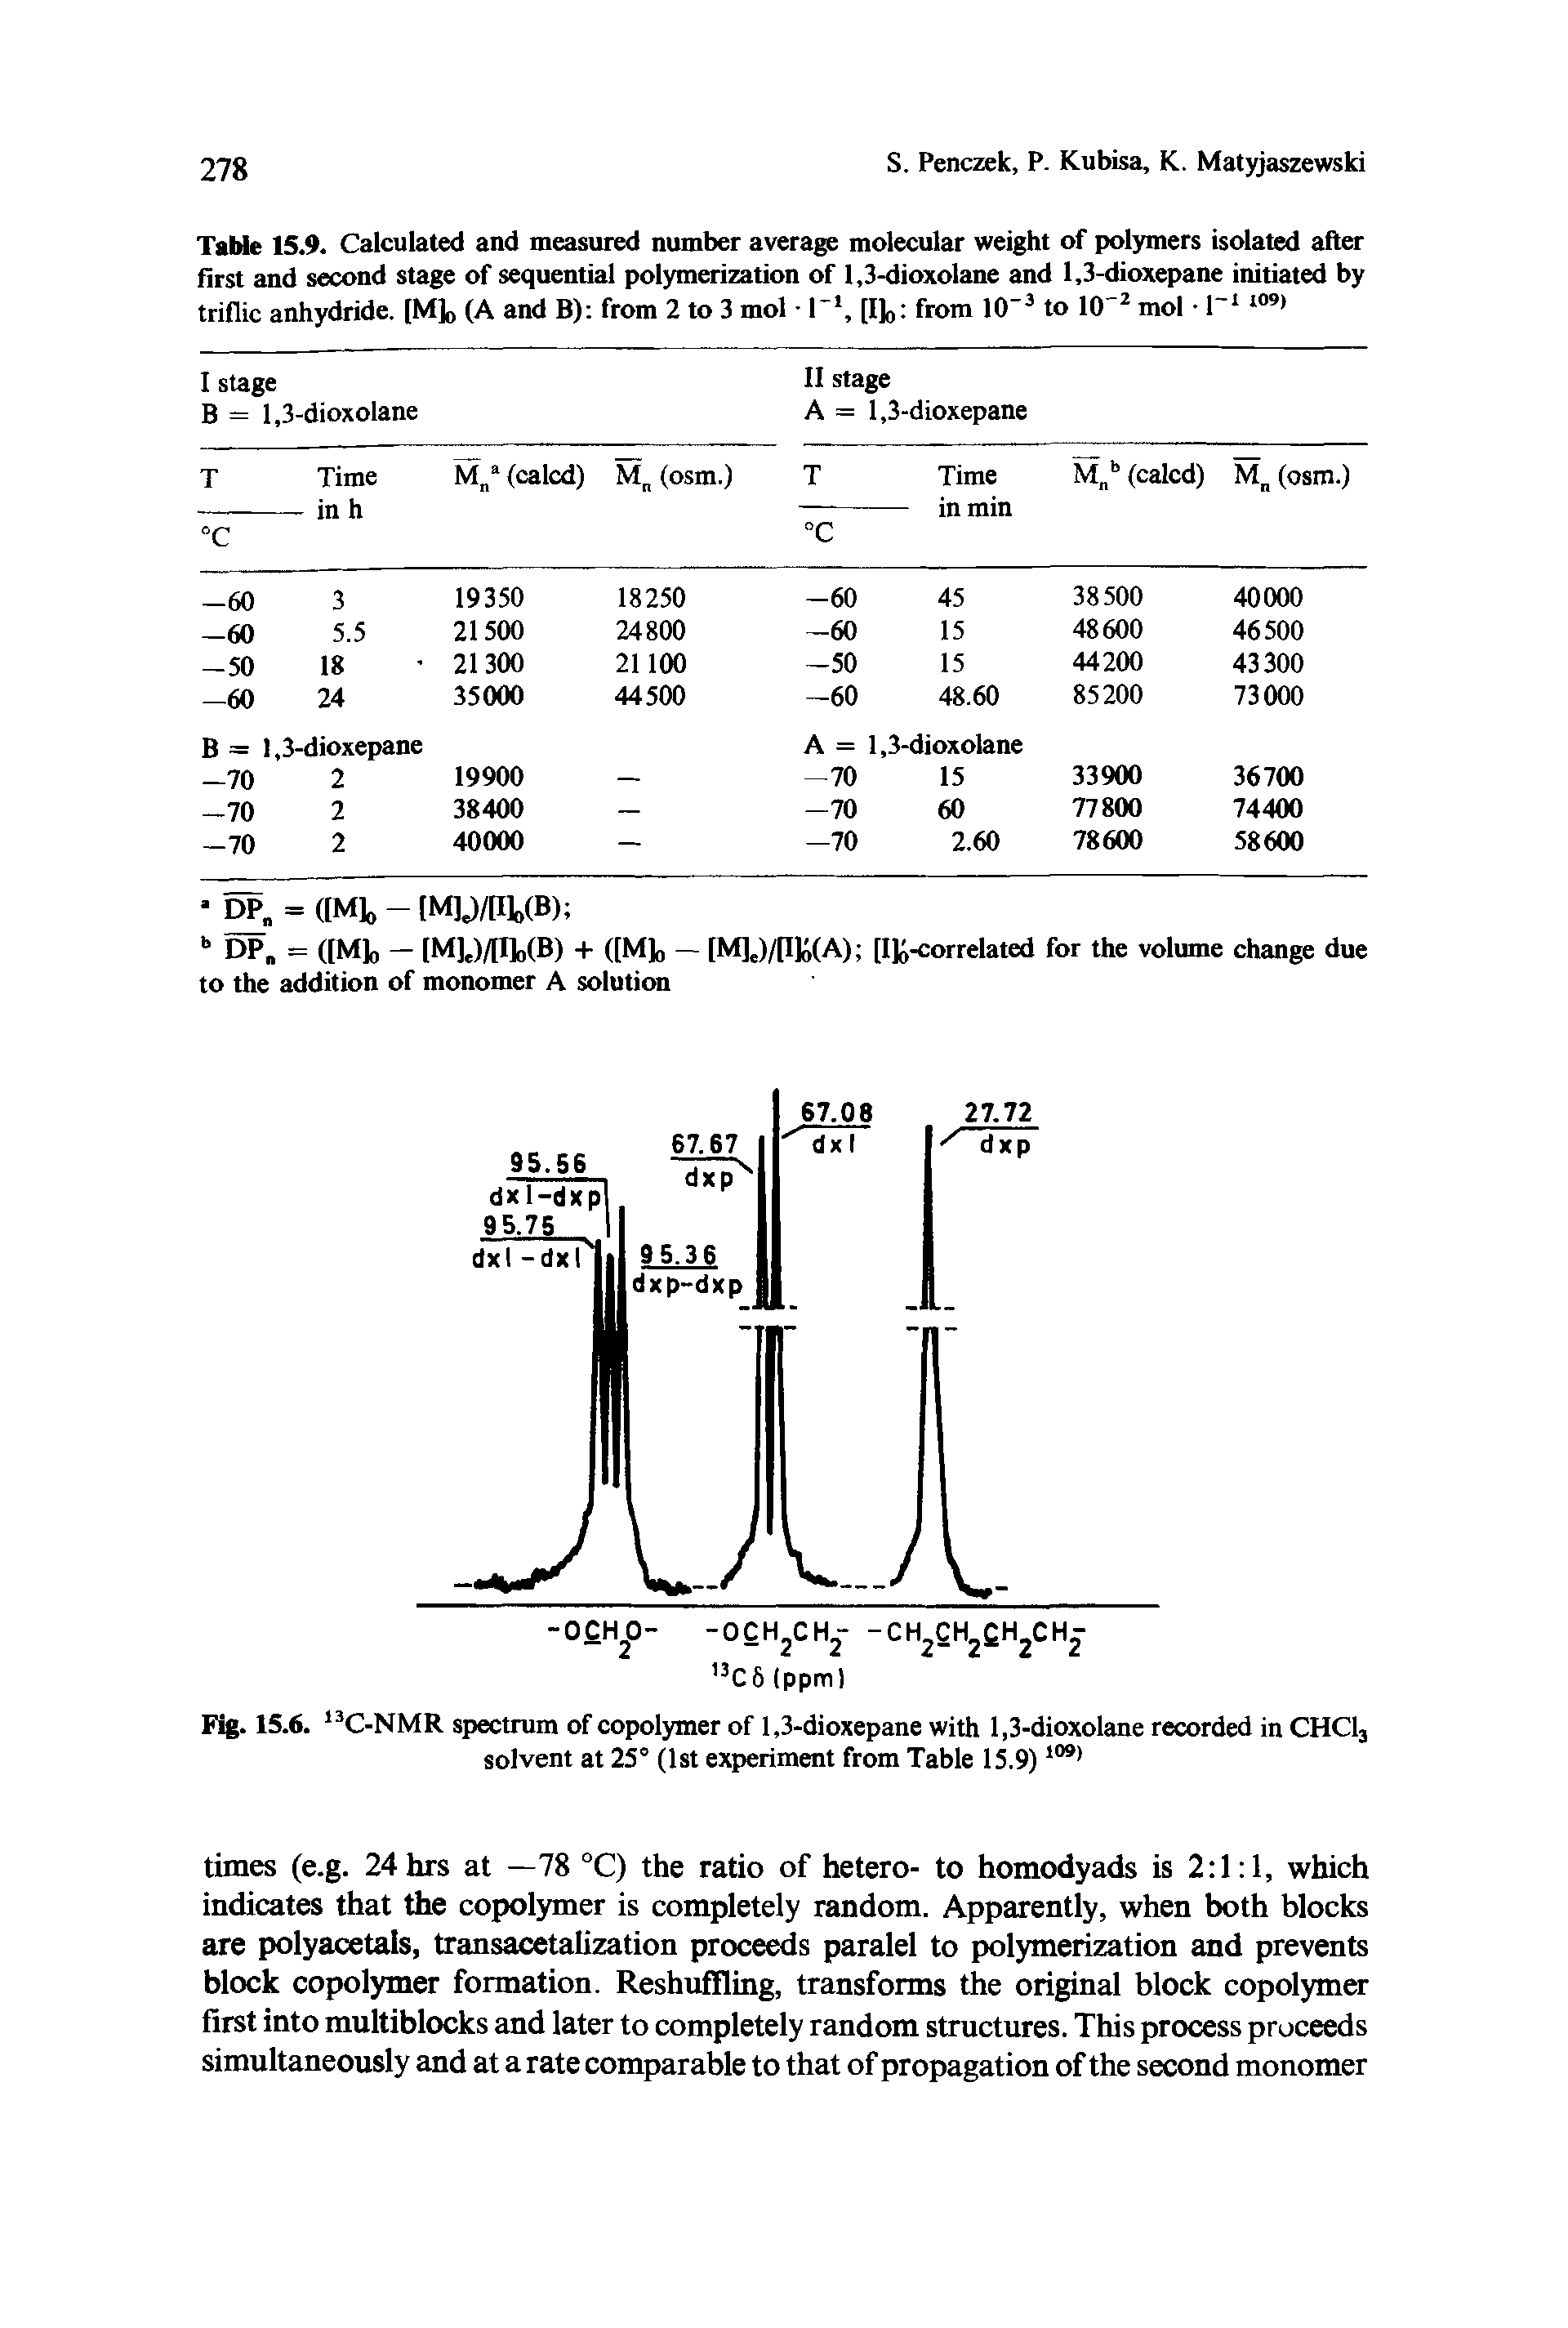 Table 15.9. Calculated and measured number average molecular weight of polymers isolated after first and second stage of sequential polymerization of 1,3-dioxolane and 1,3-dioxepane initiated by triflic anhydride. [M]o (A and B) from 2 to 3 mol I 1, [I]q from 10"3 to 10 2 mol 1 1109>...